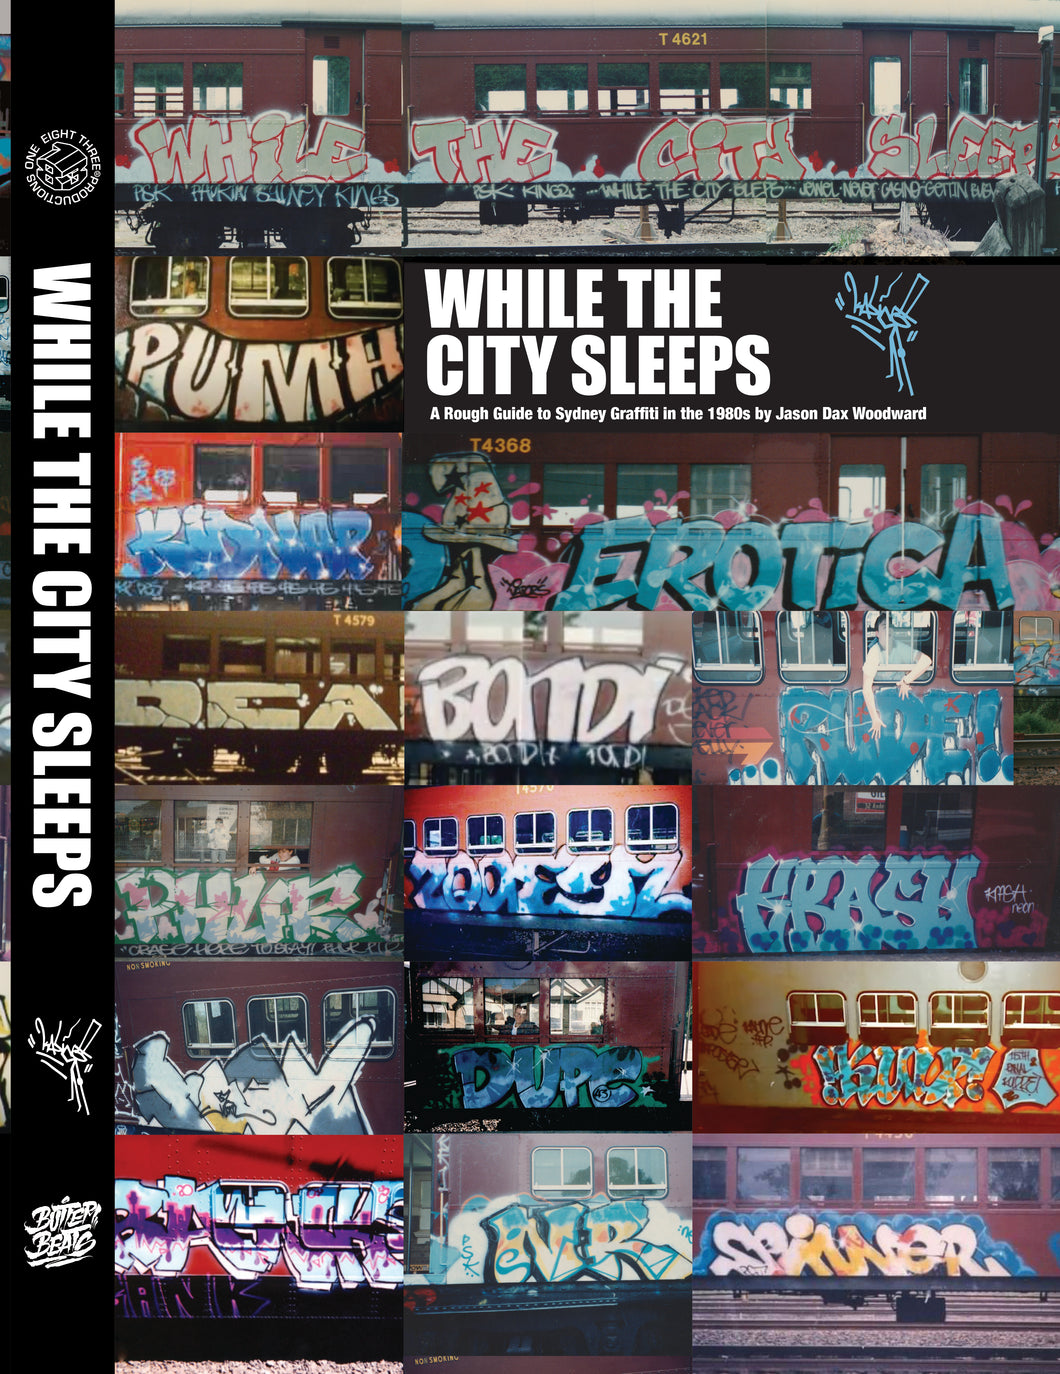 WHILE THE CITY SLEEPS - A Rough Guide to Sydney Graffiti in the 80s - book by Jason Dax Woodward